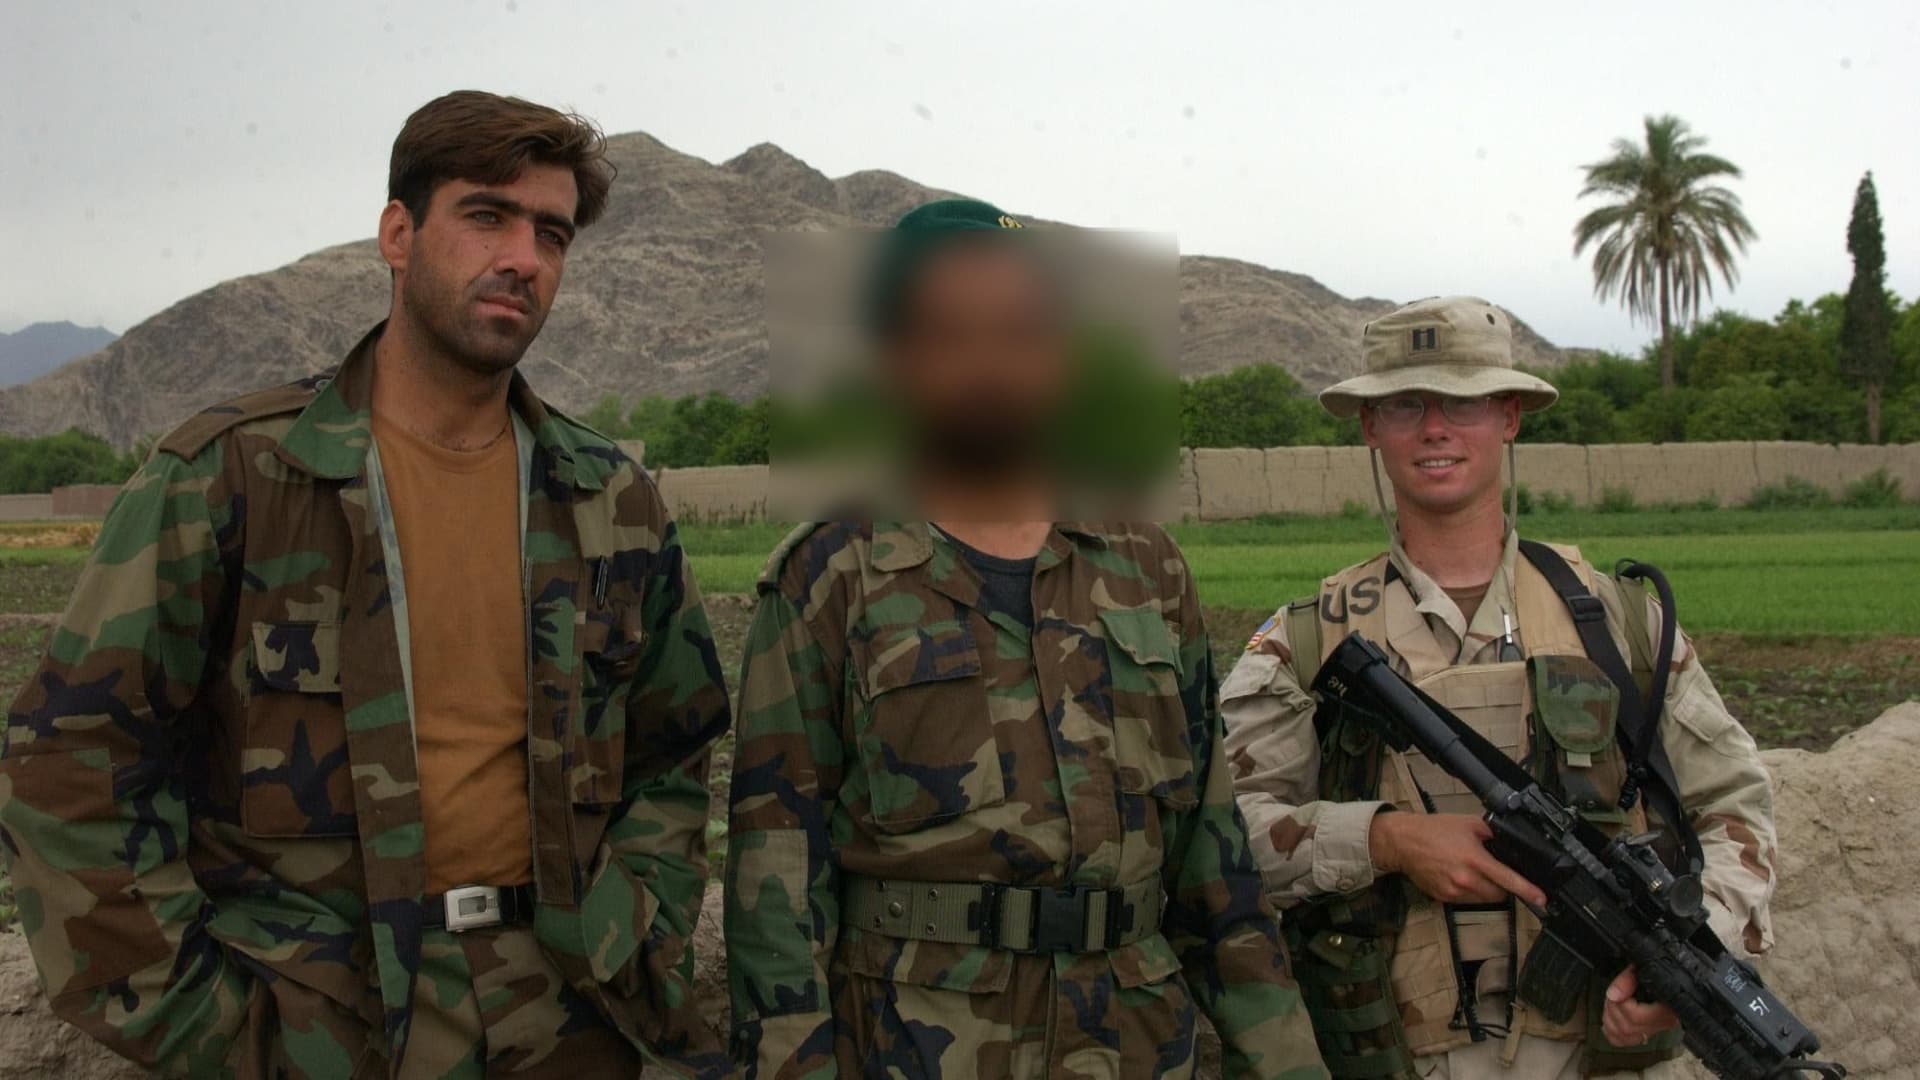 A 2004 photo of Antifullah Ahmadzai (left) and Mike Kuszpa (right) in Afghanistan.